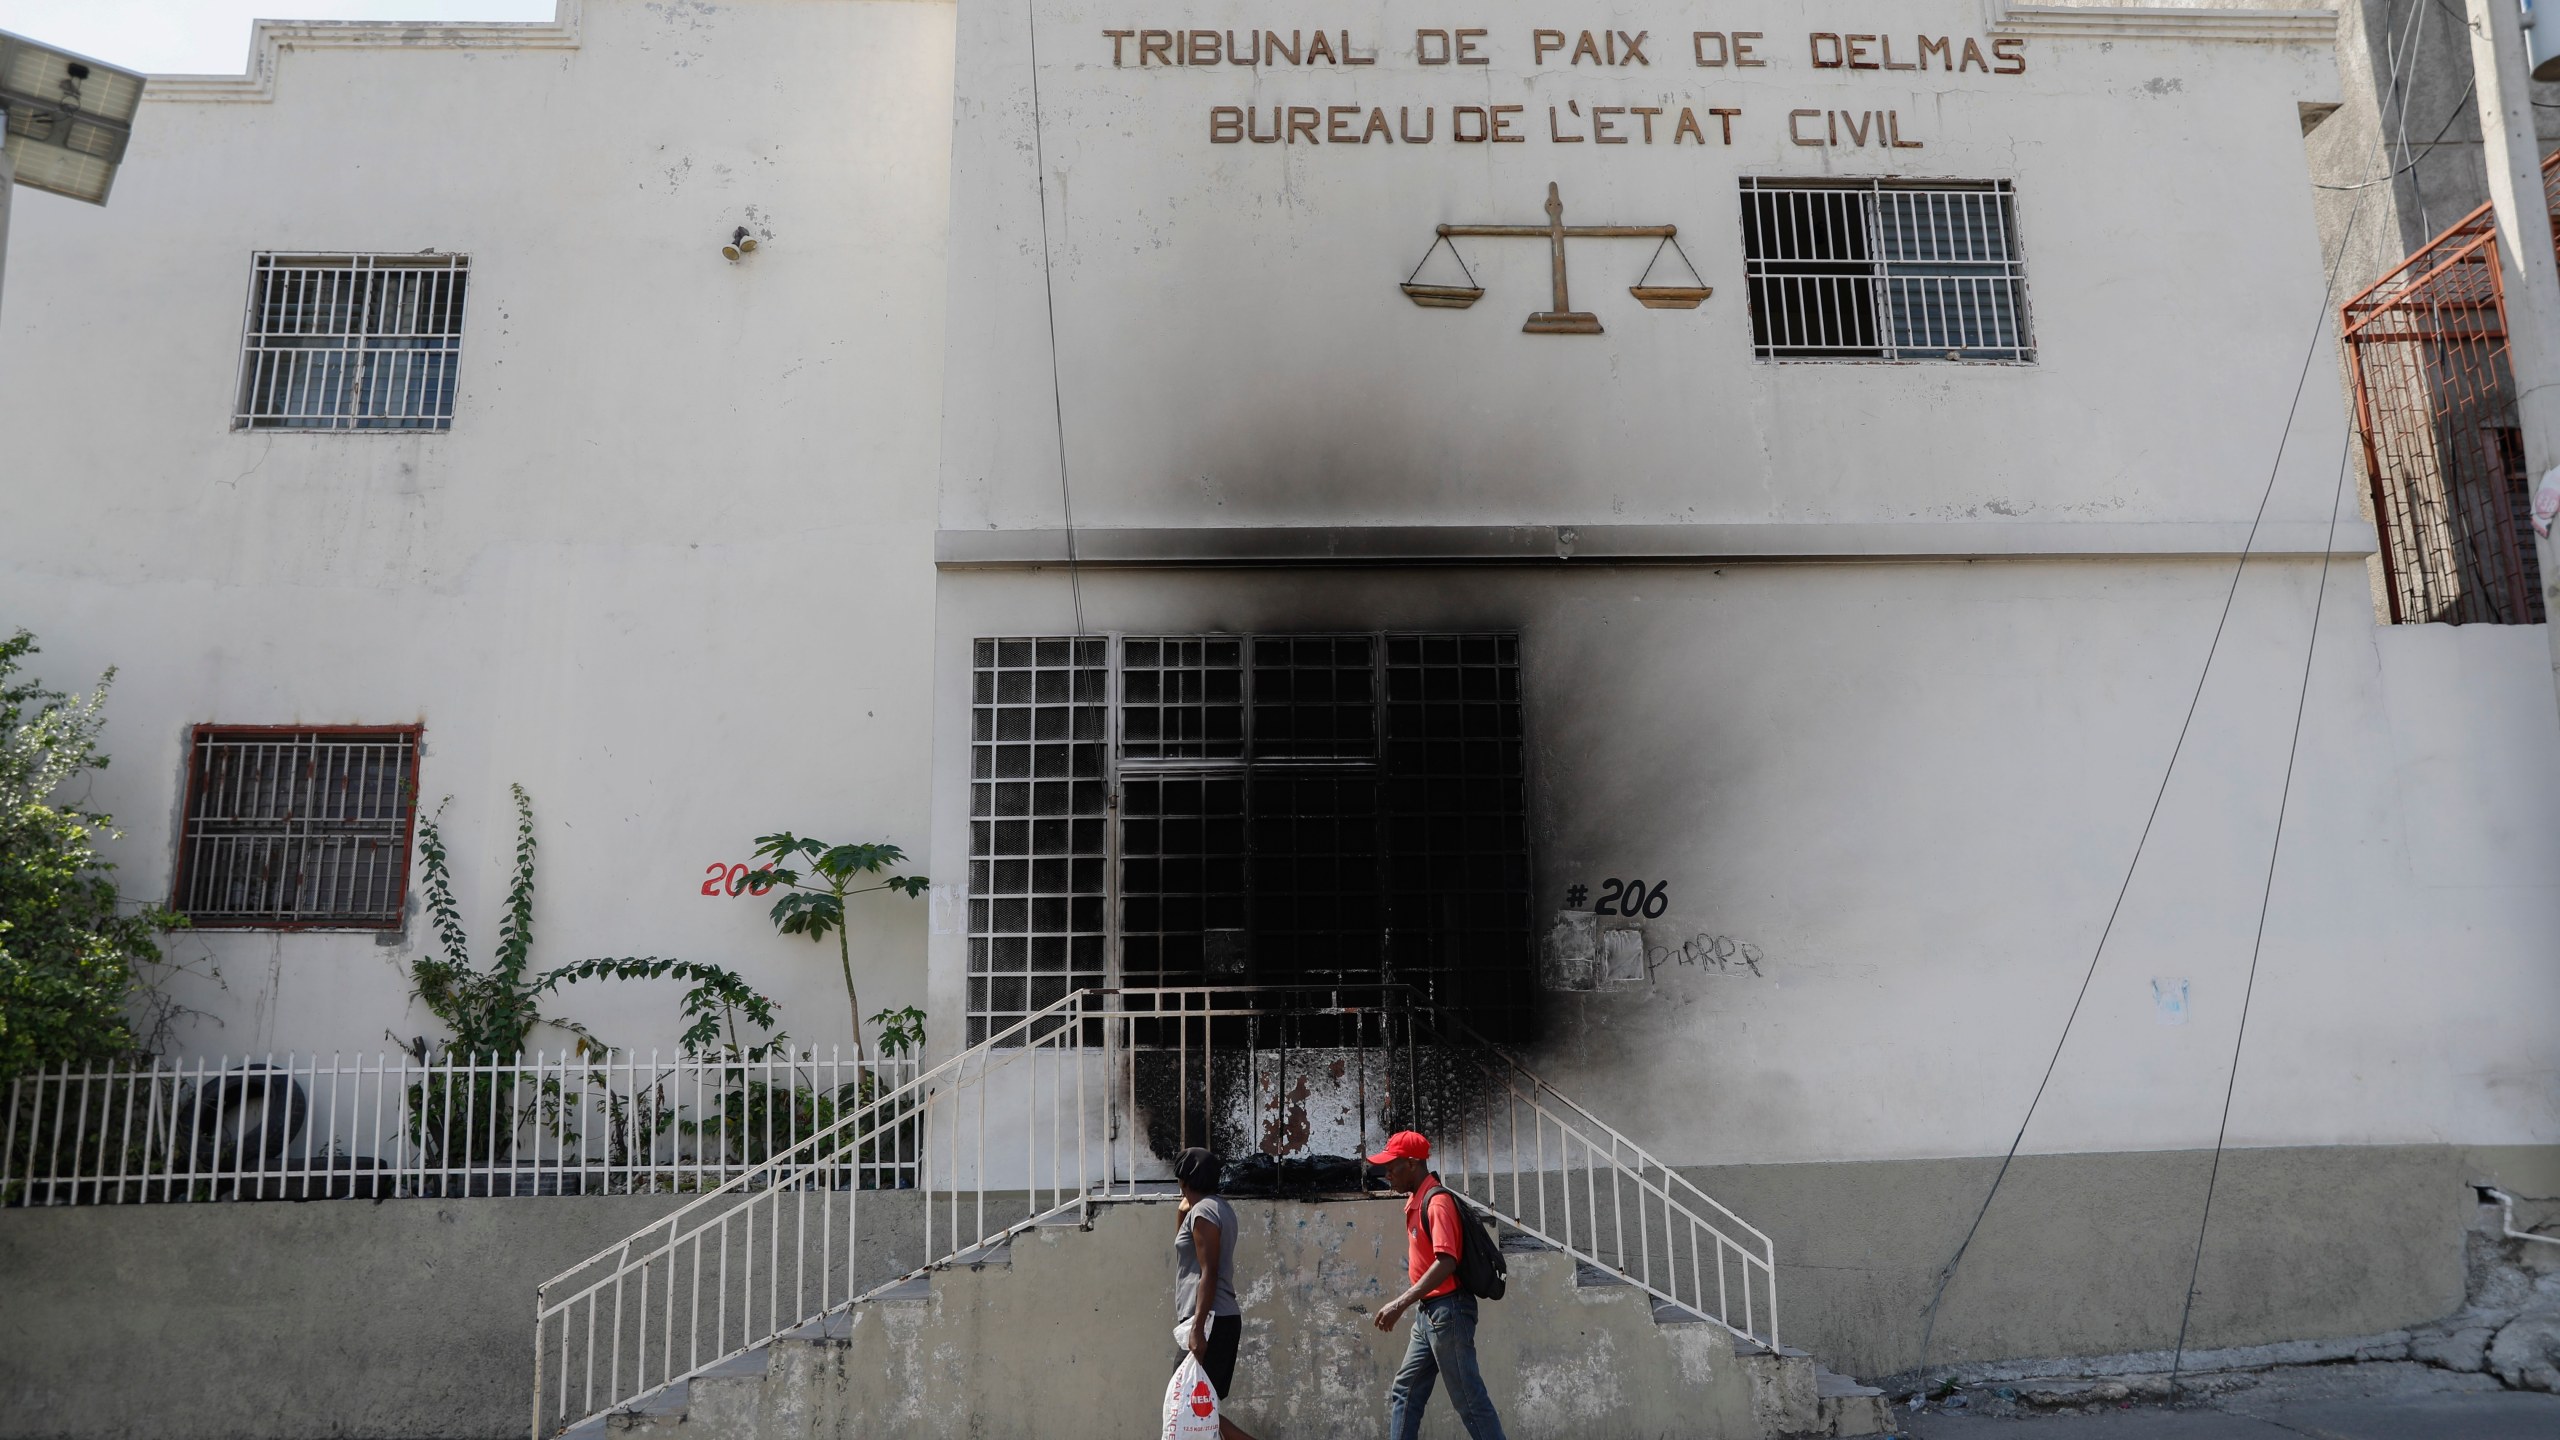 Pedestrians walk past a court building that was set on fire by gangs moments before in the Delmas 28 neighborhood of Port-au-Prince, Haiti, Wednesday, March 6, 2024. (AP Photo/Odelyn Joseph)